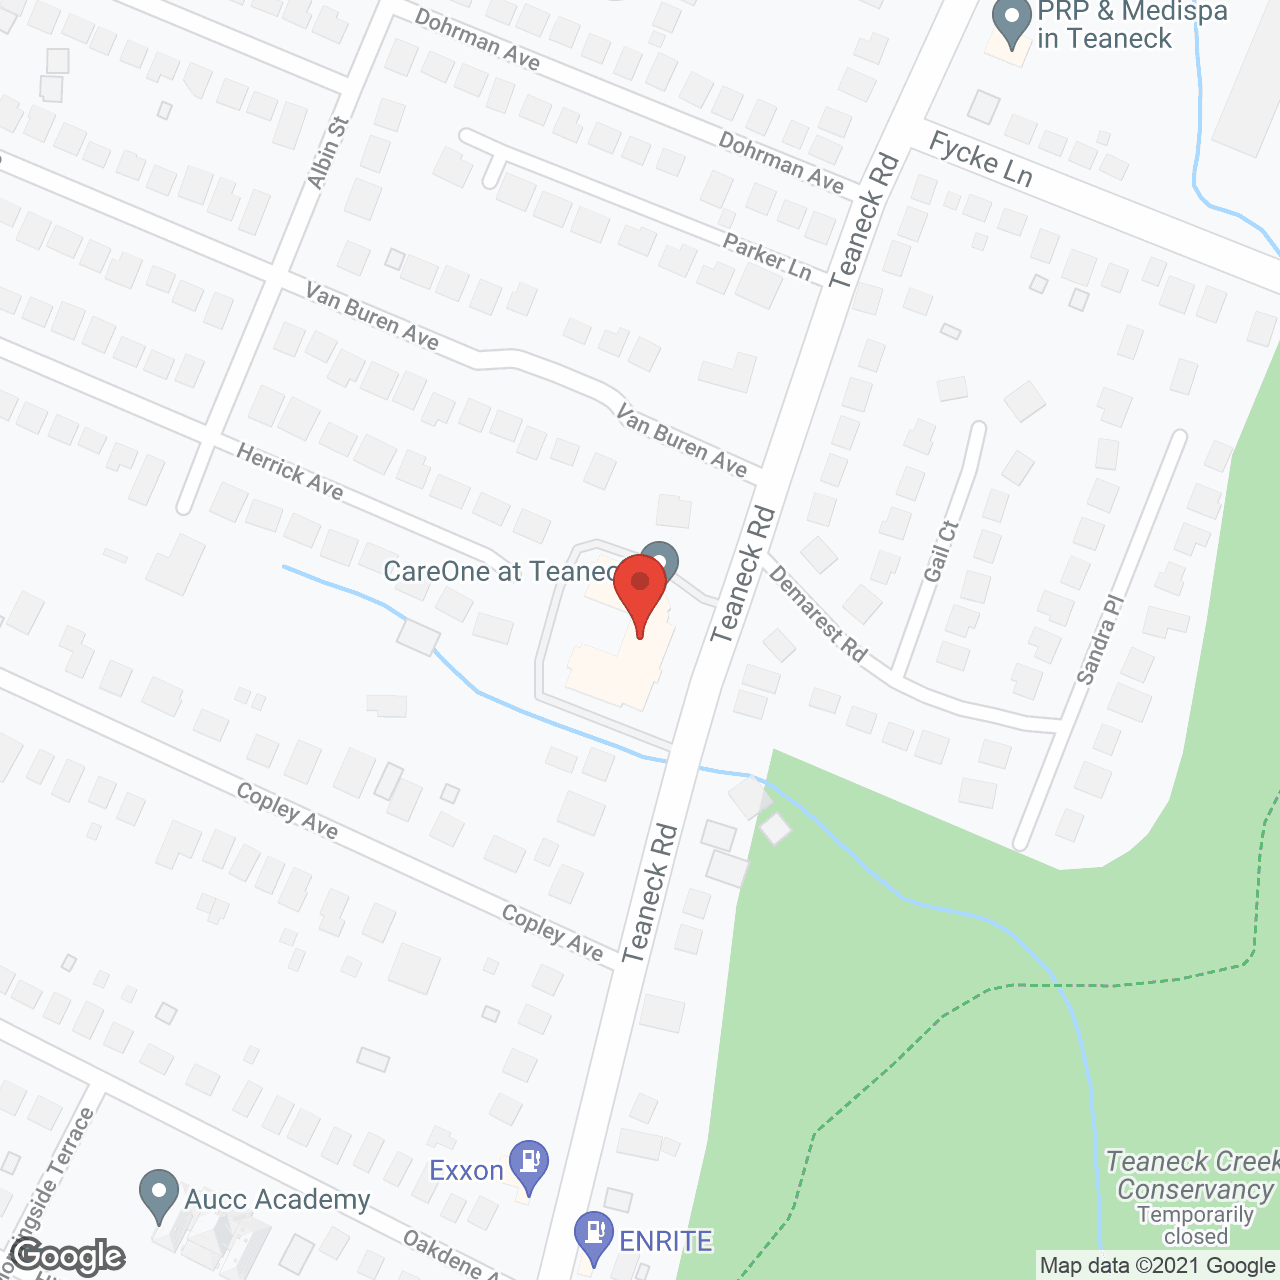 CareOne at Teaneck in google map